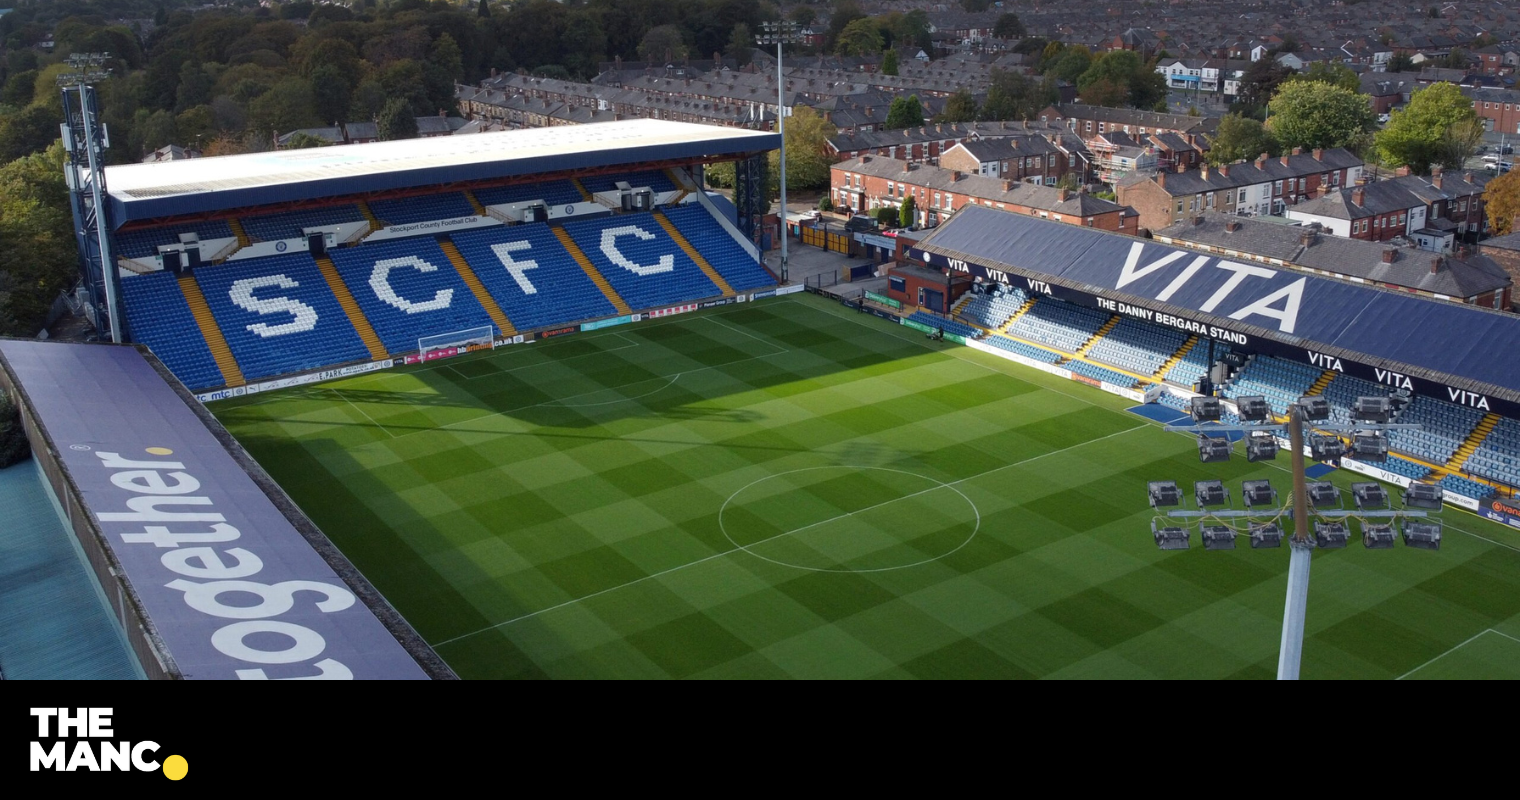 Stockport County promise to lower ticket prices after fans complain of ‘outrageous’ hike